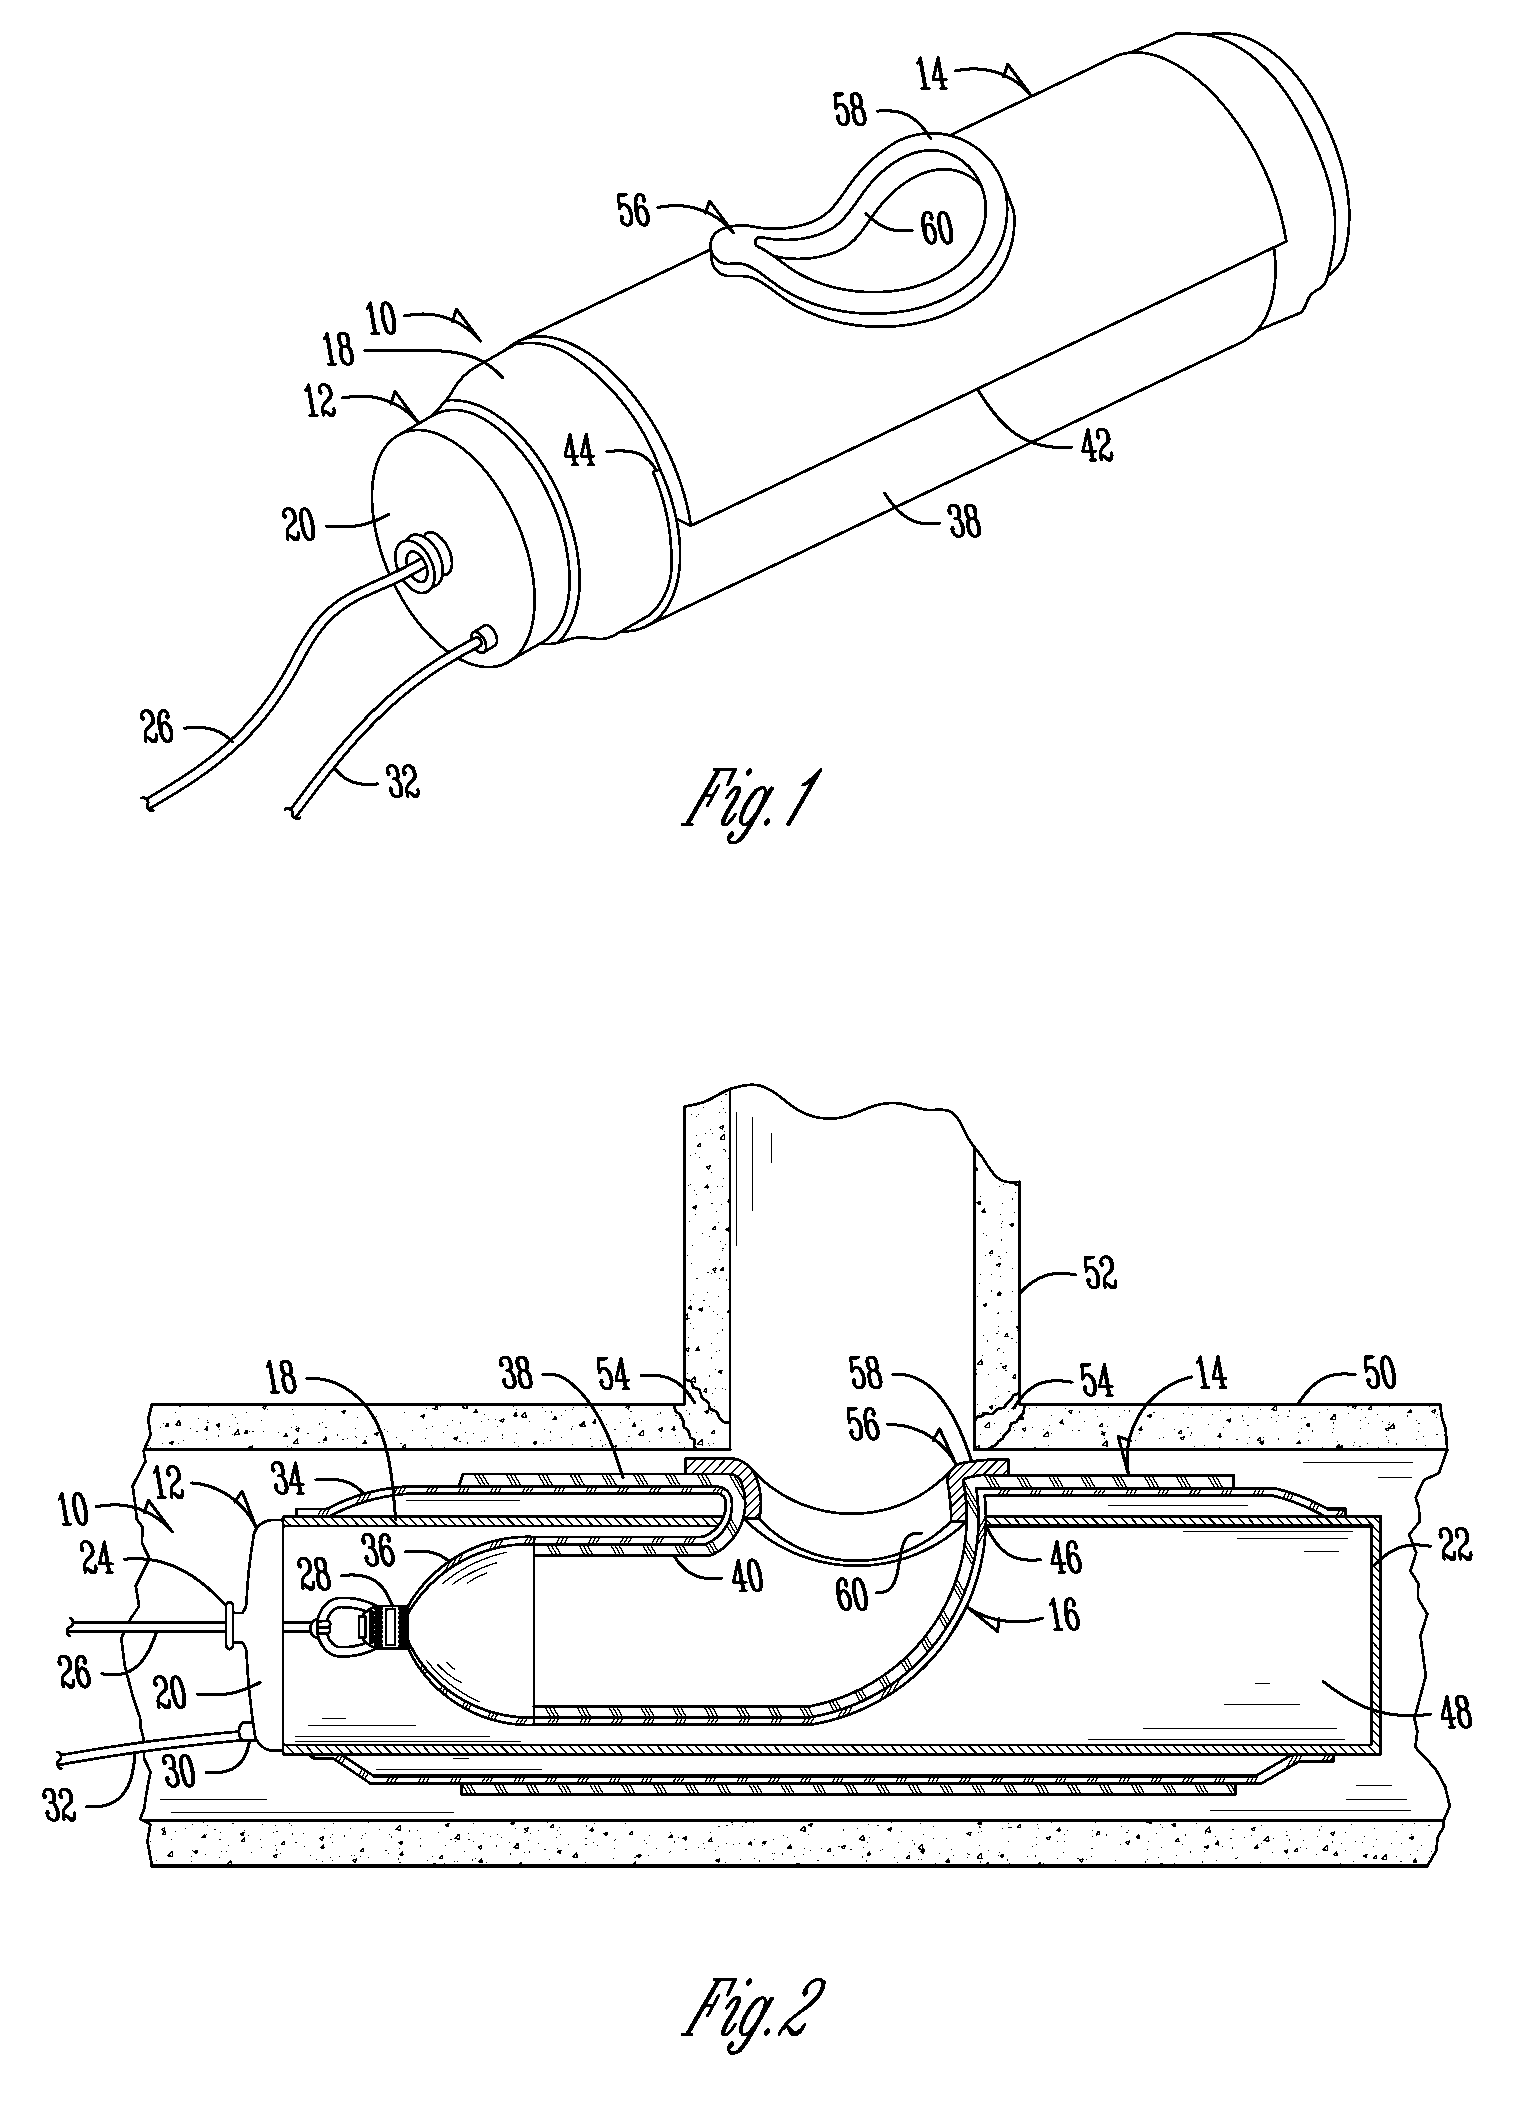 Device and method for repairing pipe